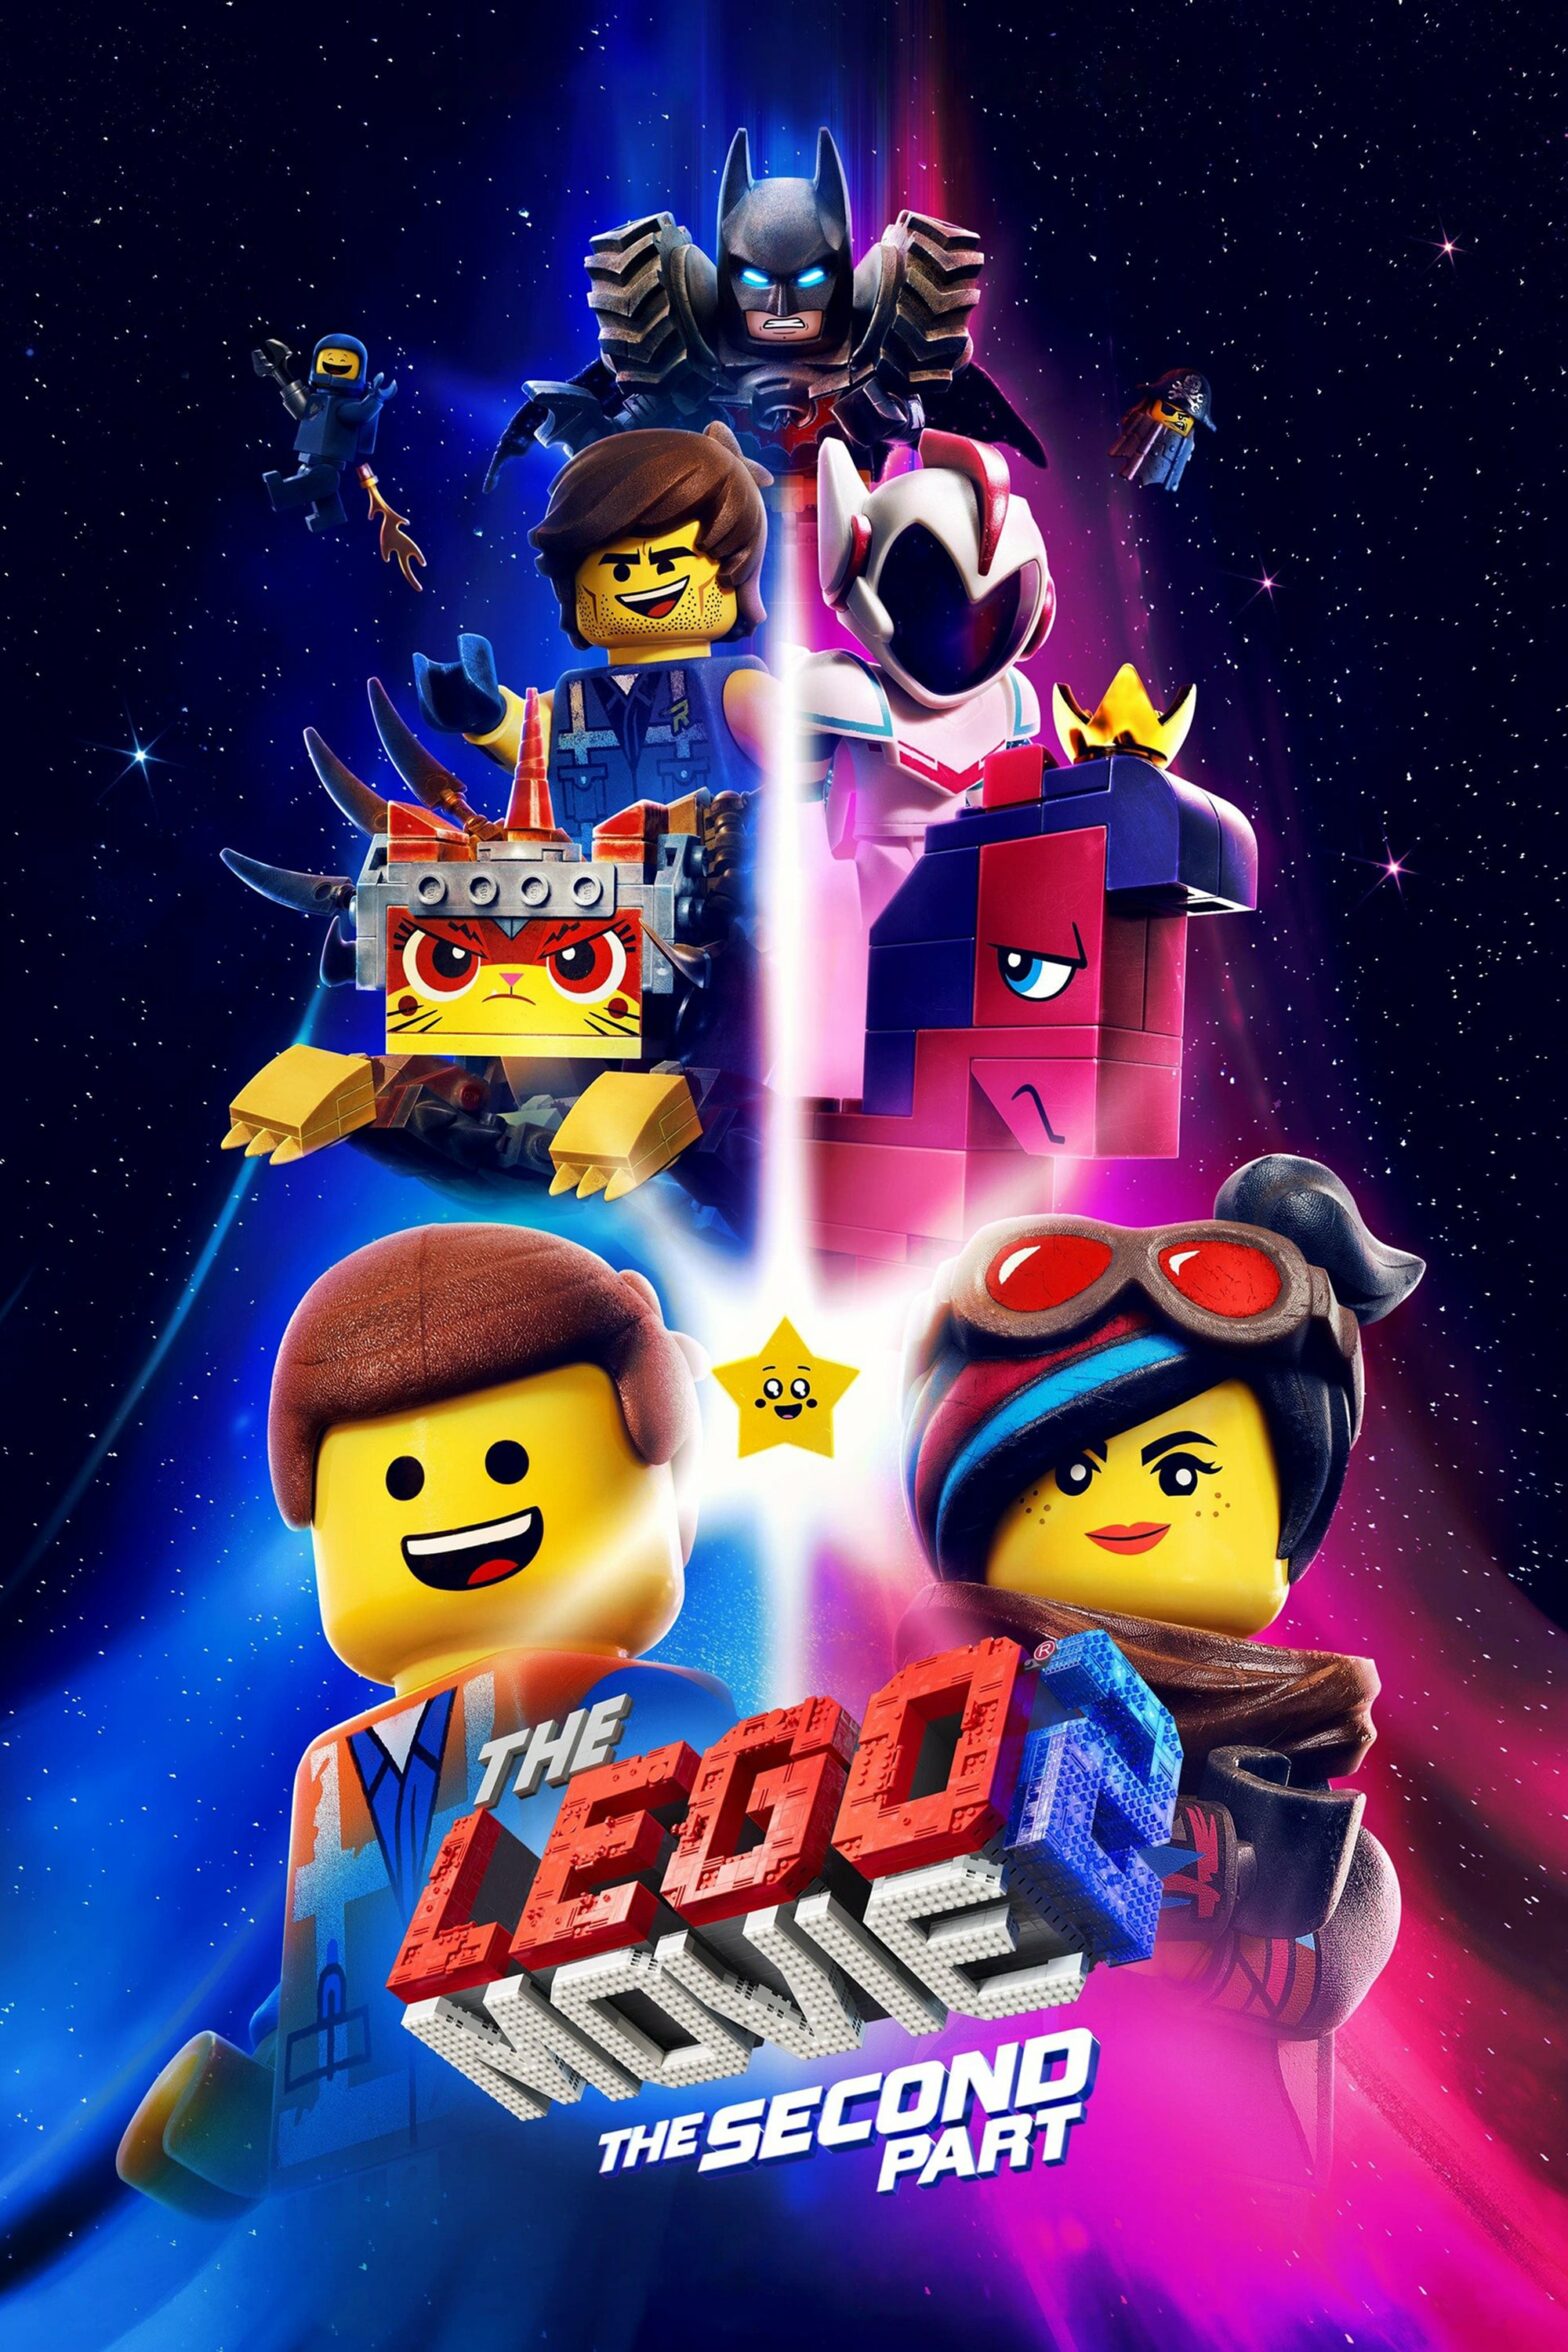 Poster for the movie "The Lego Movie 2: The Second Part"